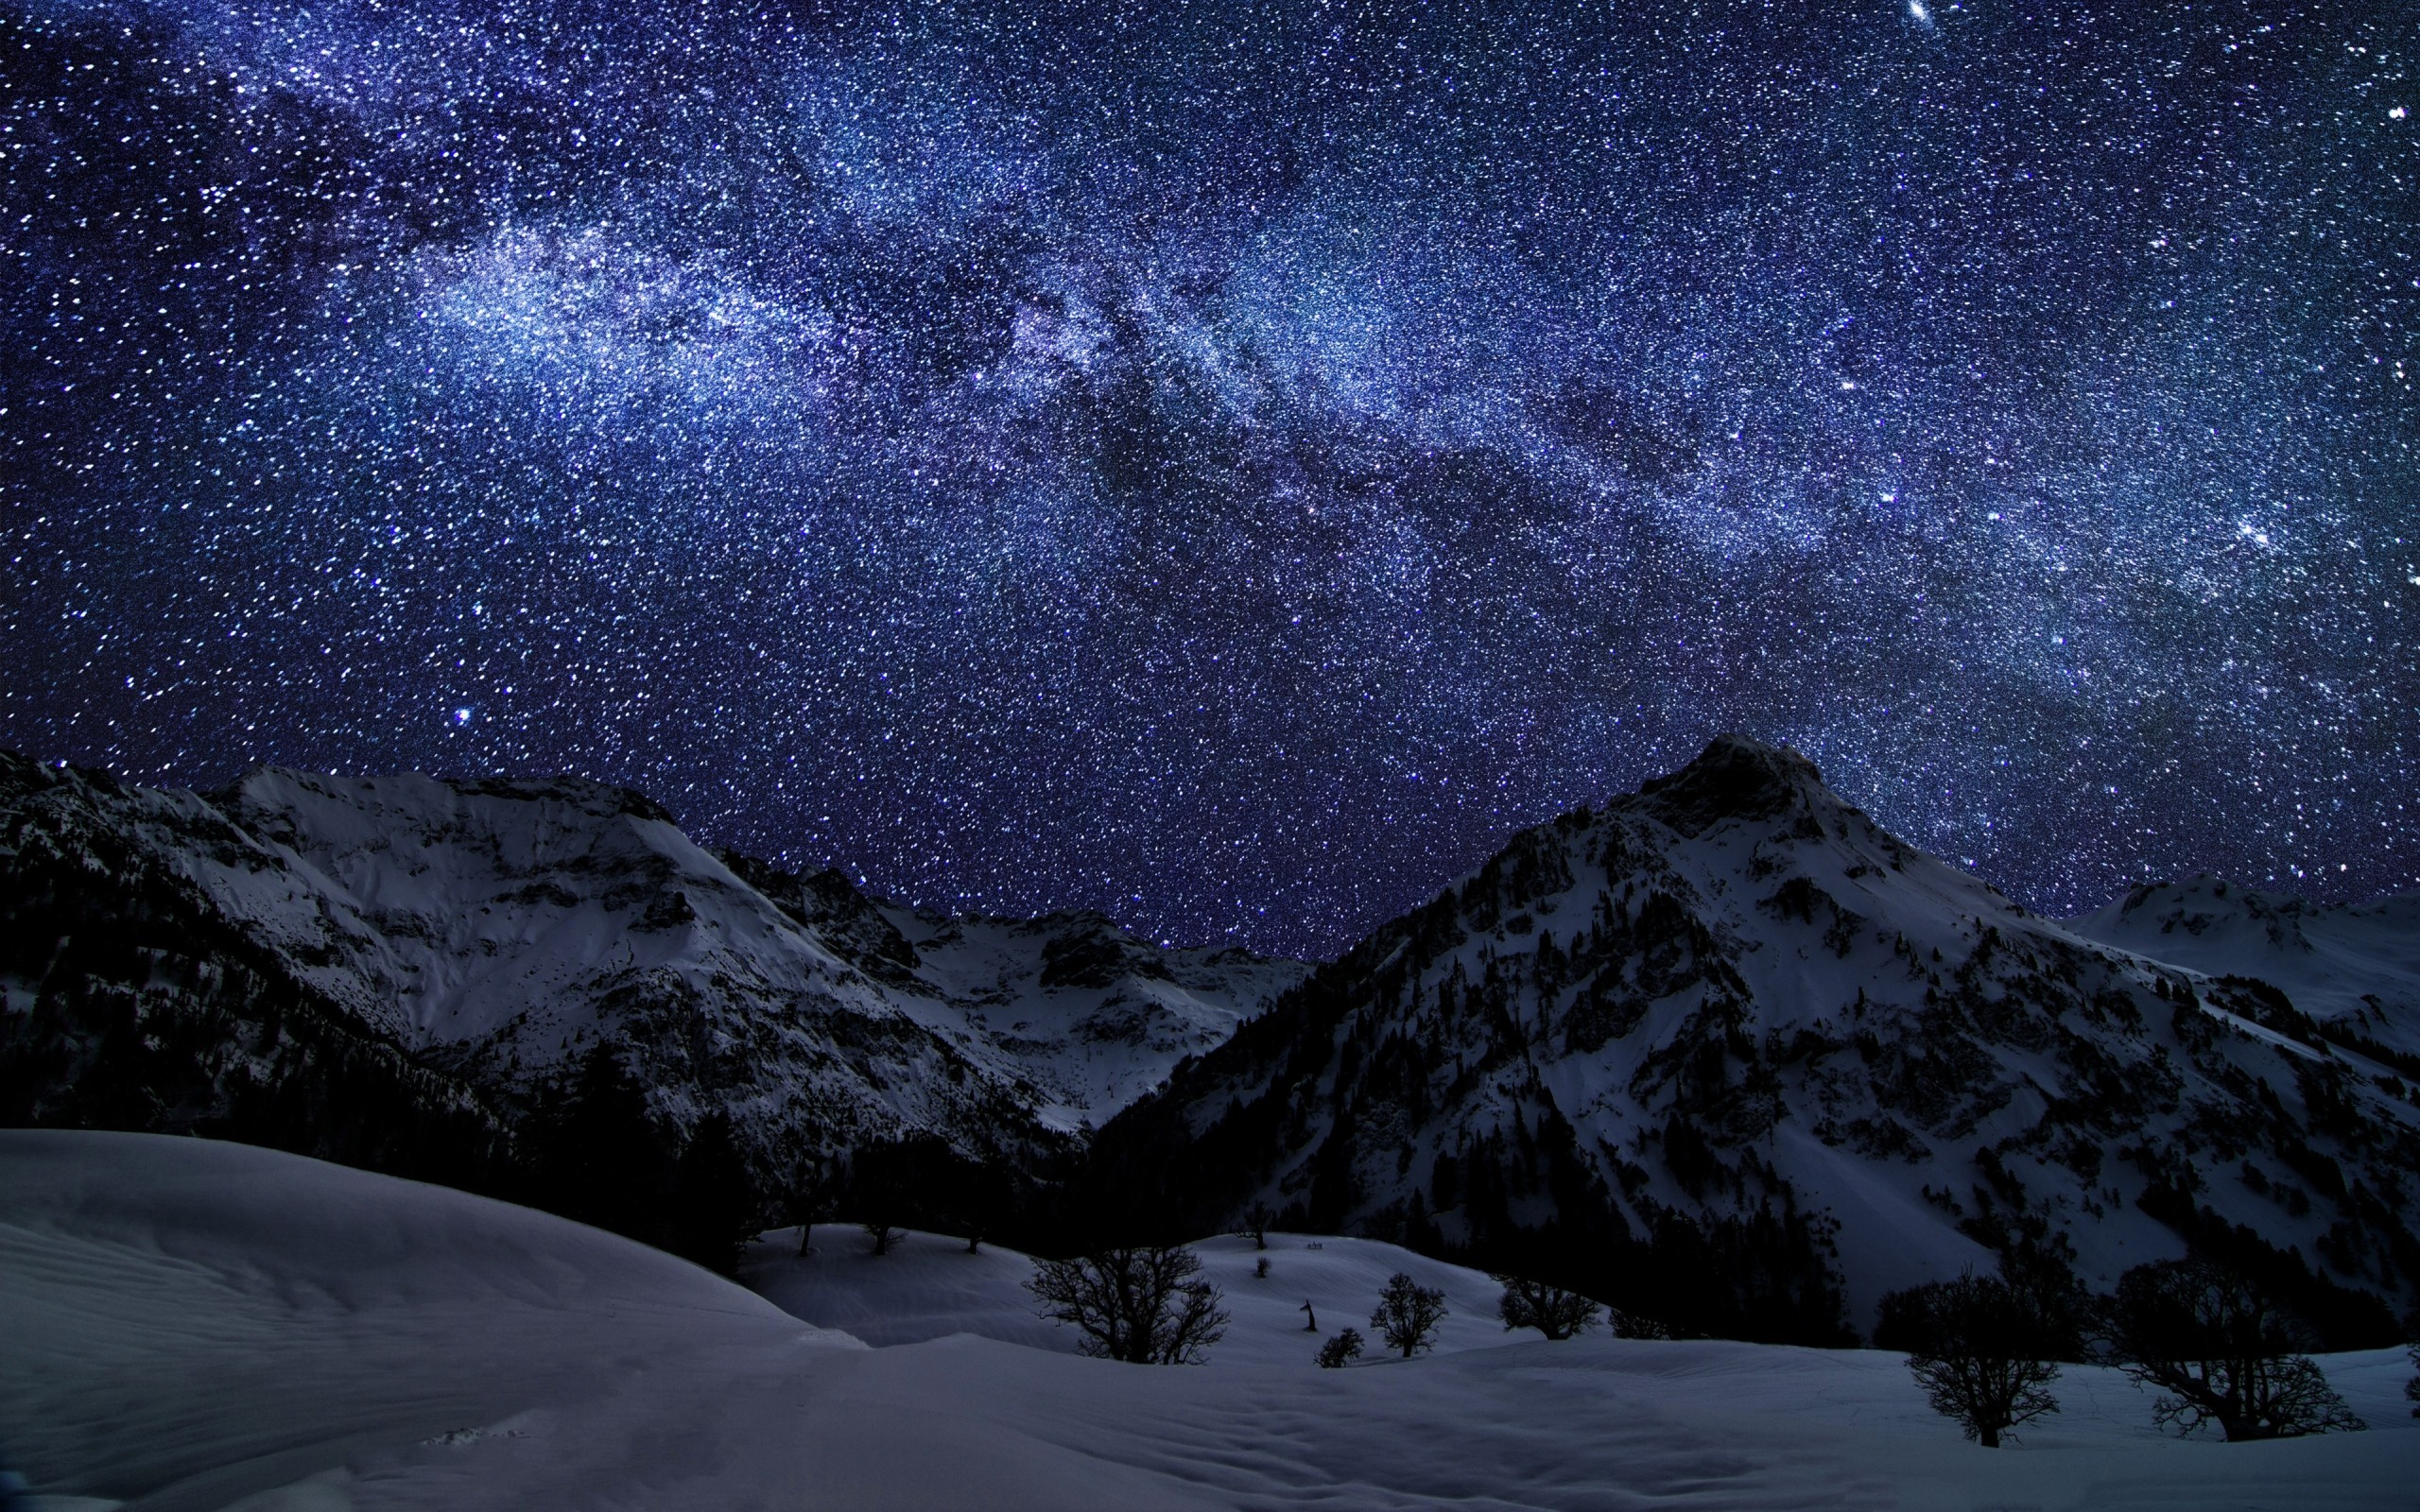 General 2560x1600 landscape mountains snow sky stars starry night nature space starred sky blue night